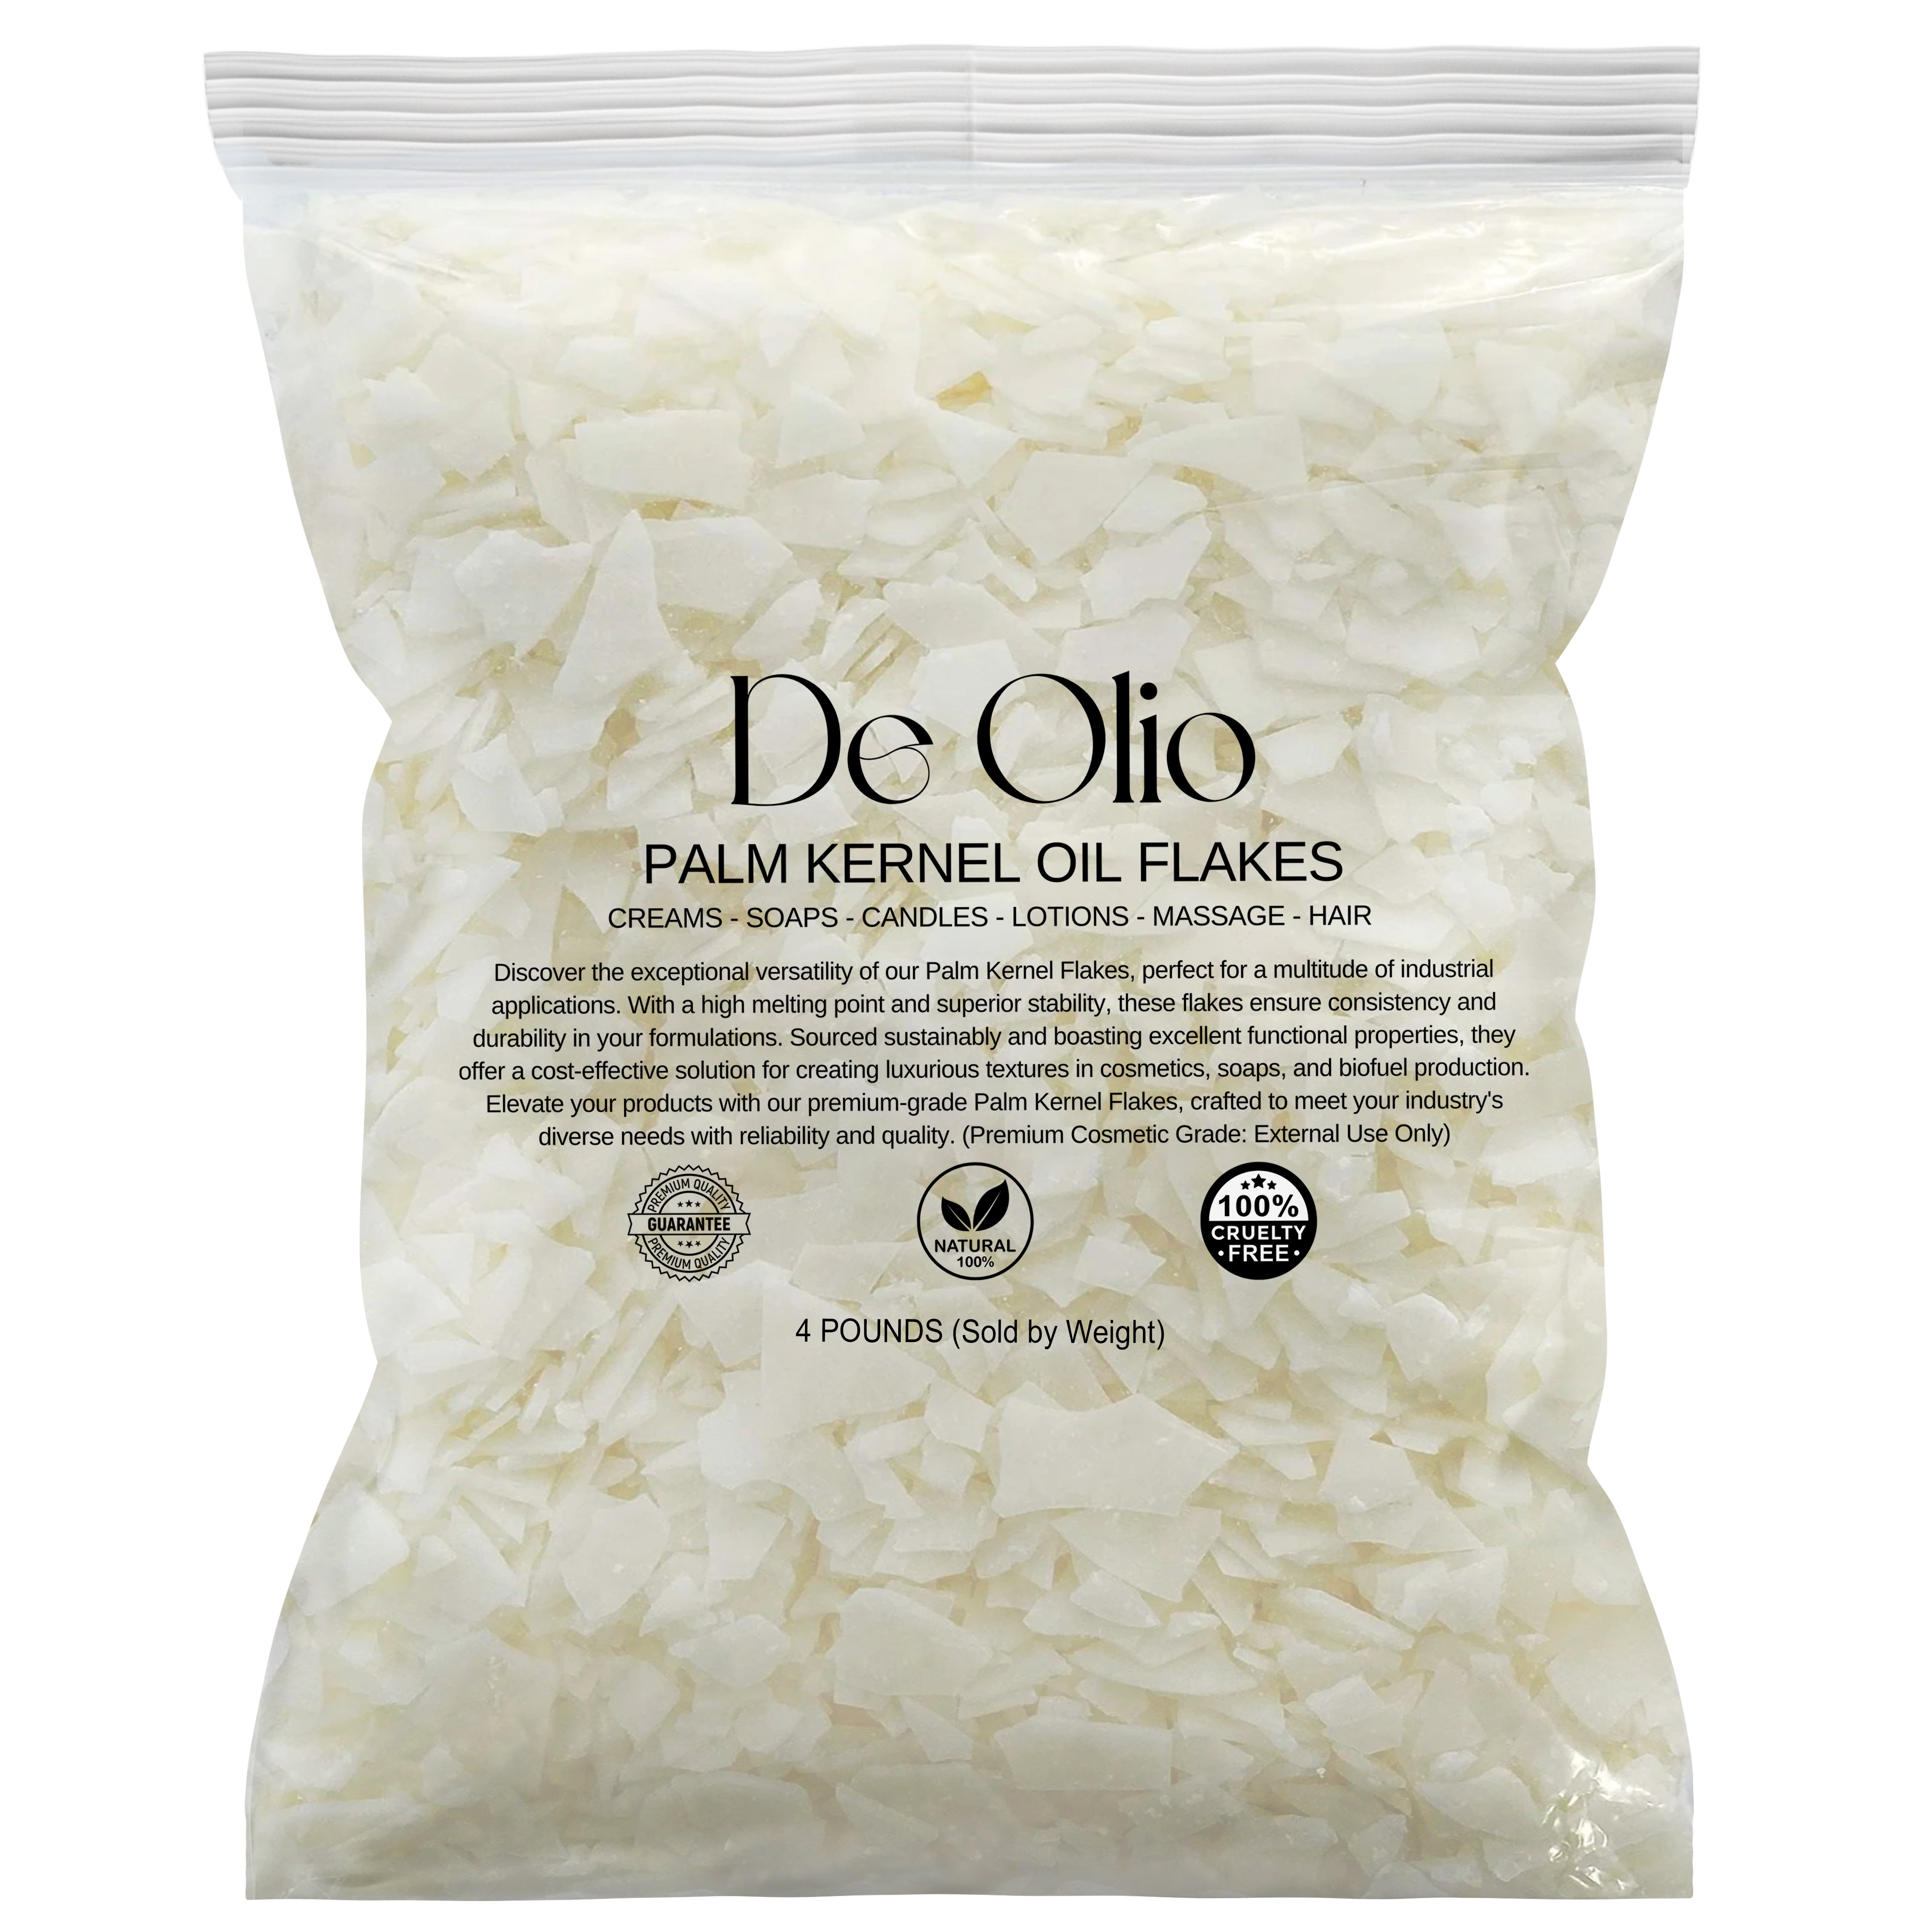 De Olio | Palm Kernel Oil Flakes | for Soap Making, Lotions, Creams & Candle Making | Premium Cosmetic Grade…